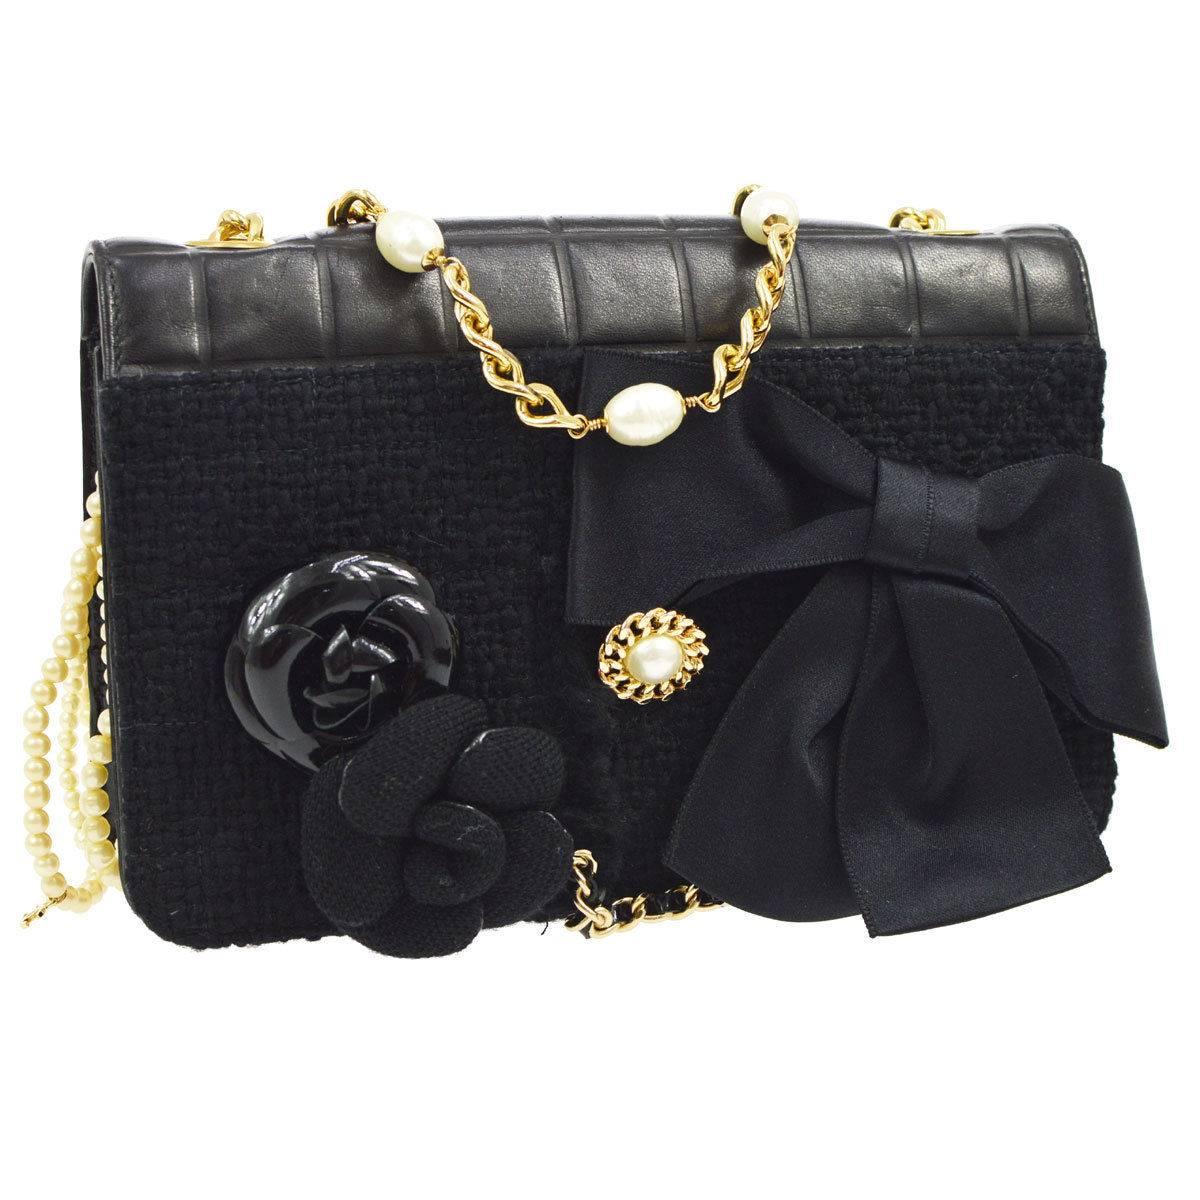 Chanel Black Leather Flower Bow Evening Clutch Pearl Chain Shoulder Flap Bag